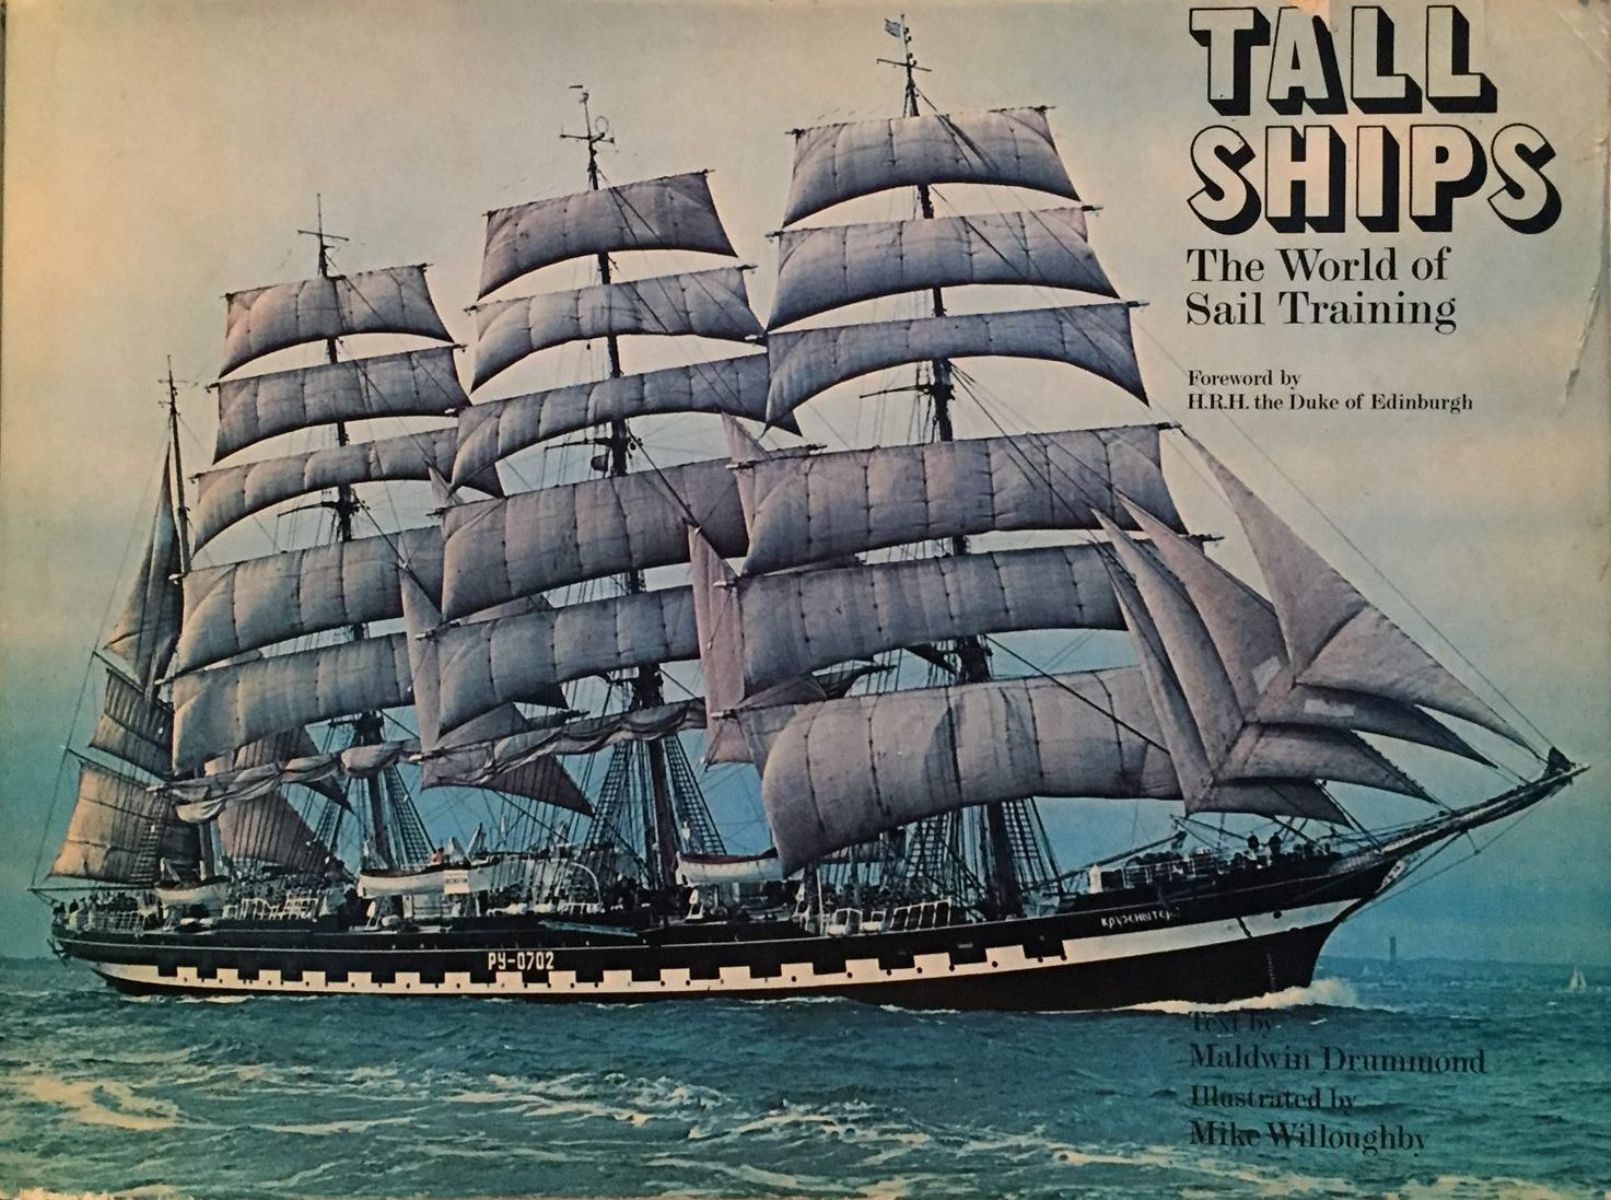 TALL SHIPS: The World of Sail Training